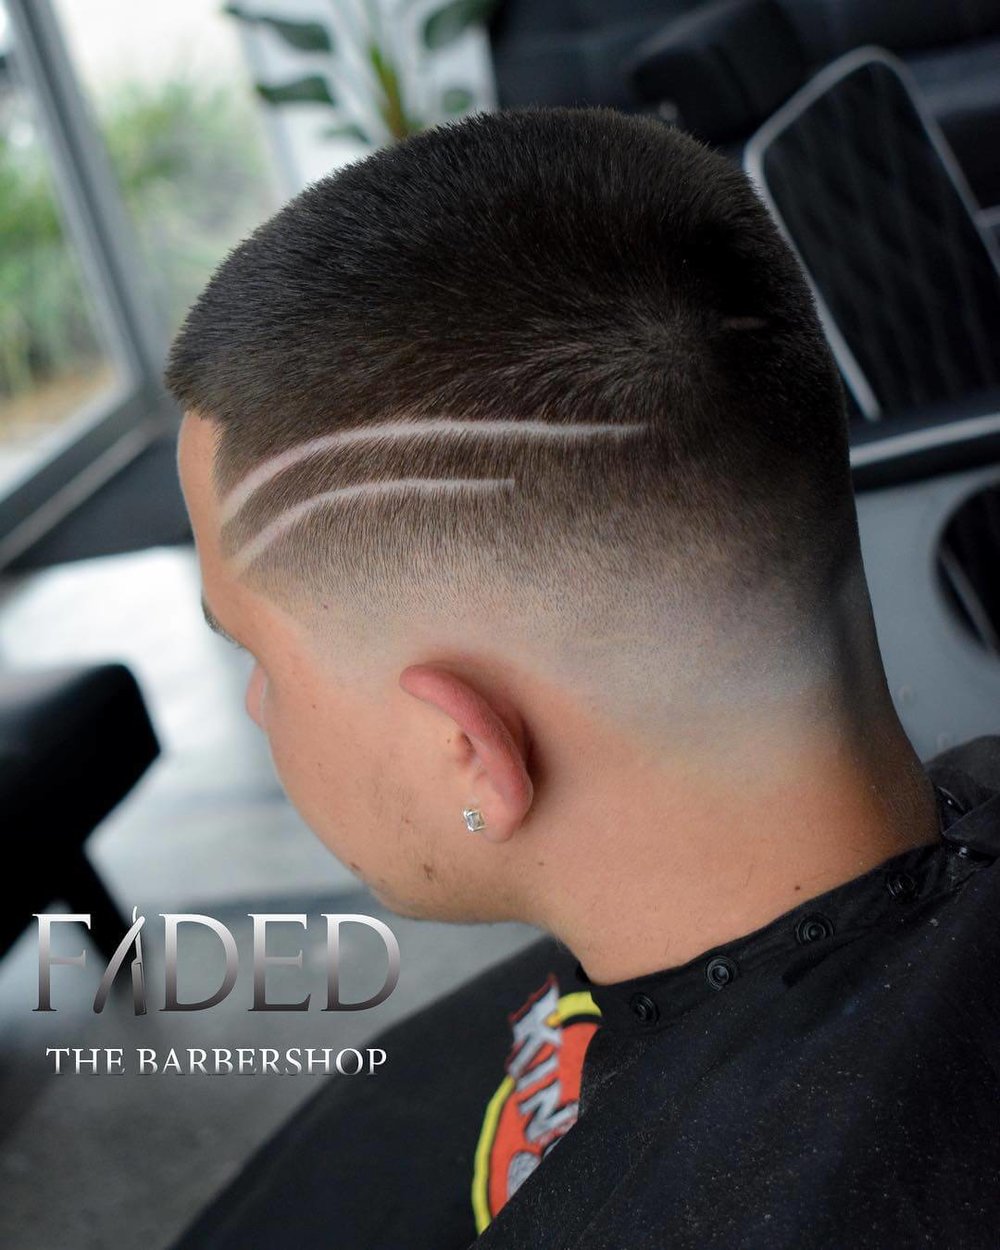 Hair Designs Gallery — Faded